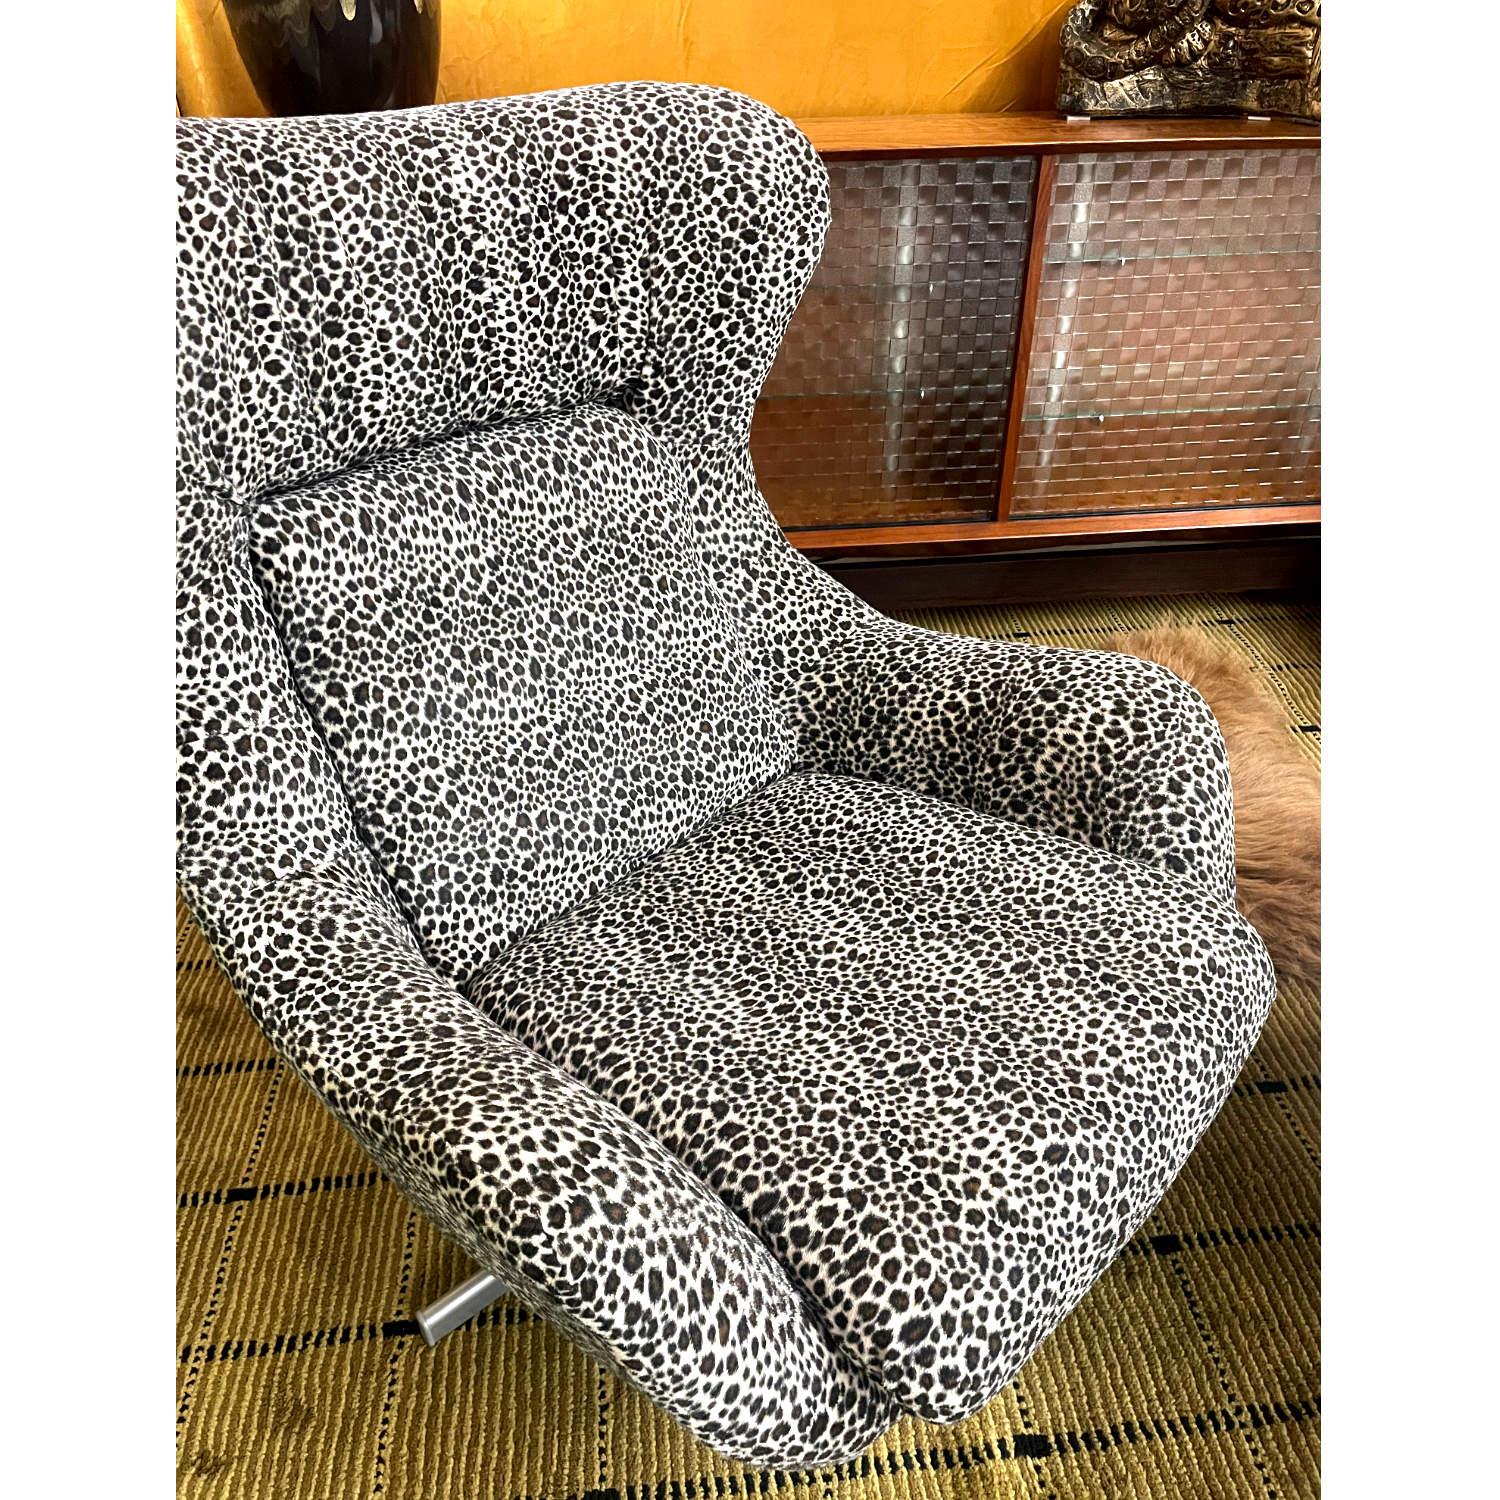 Pair of Vintage Fuzzy Leopard Arne Jacobsen Egg Chair Style Swivel Chairs For Sale 3